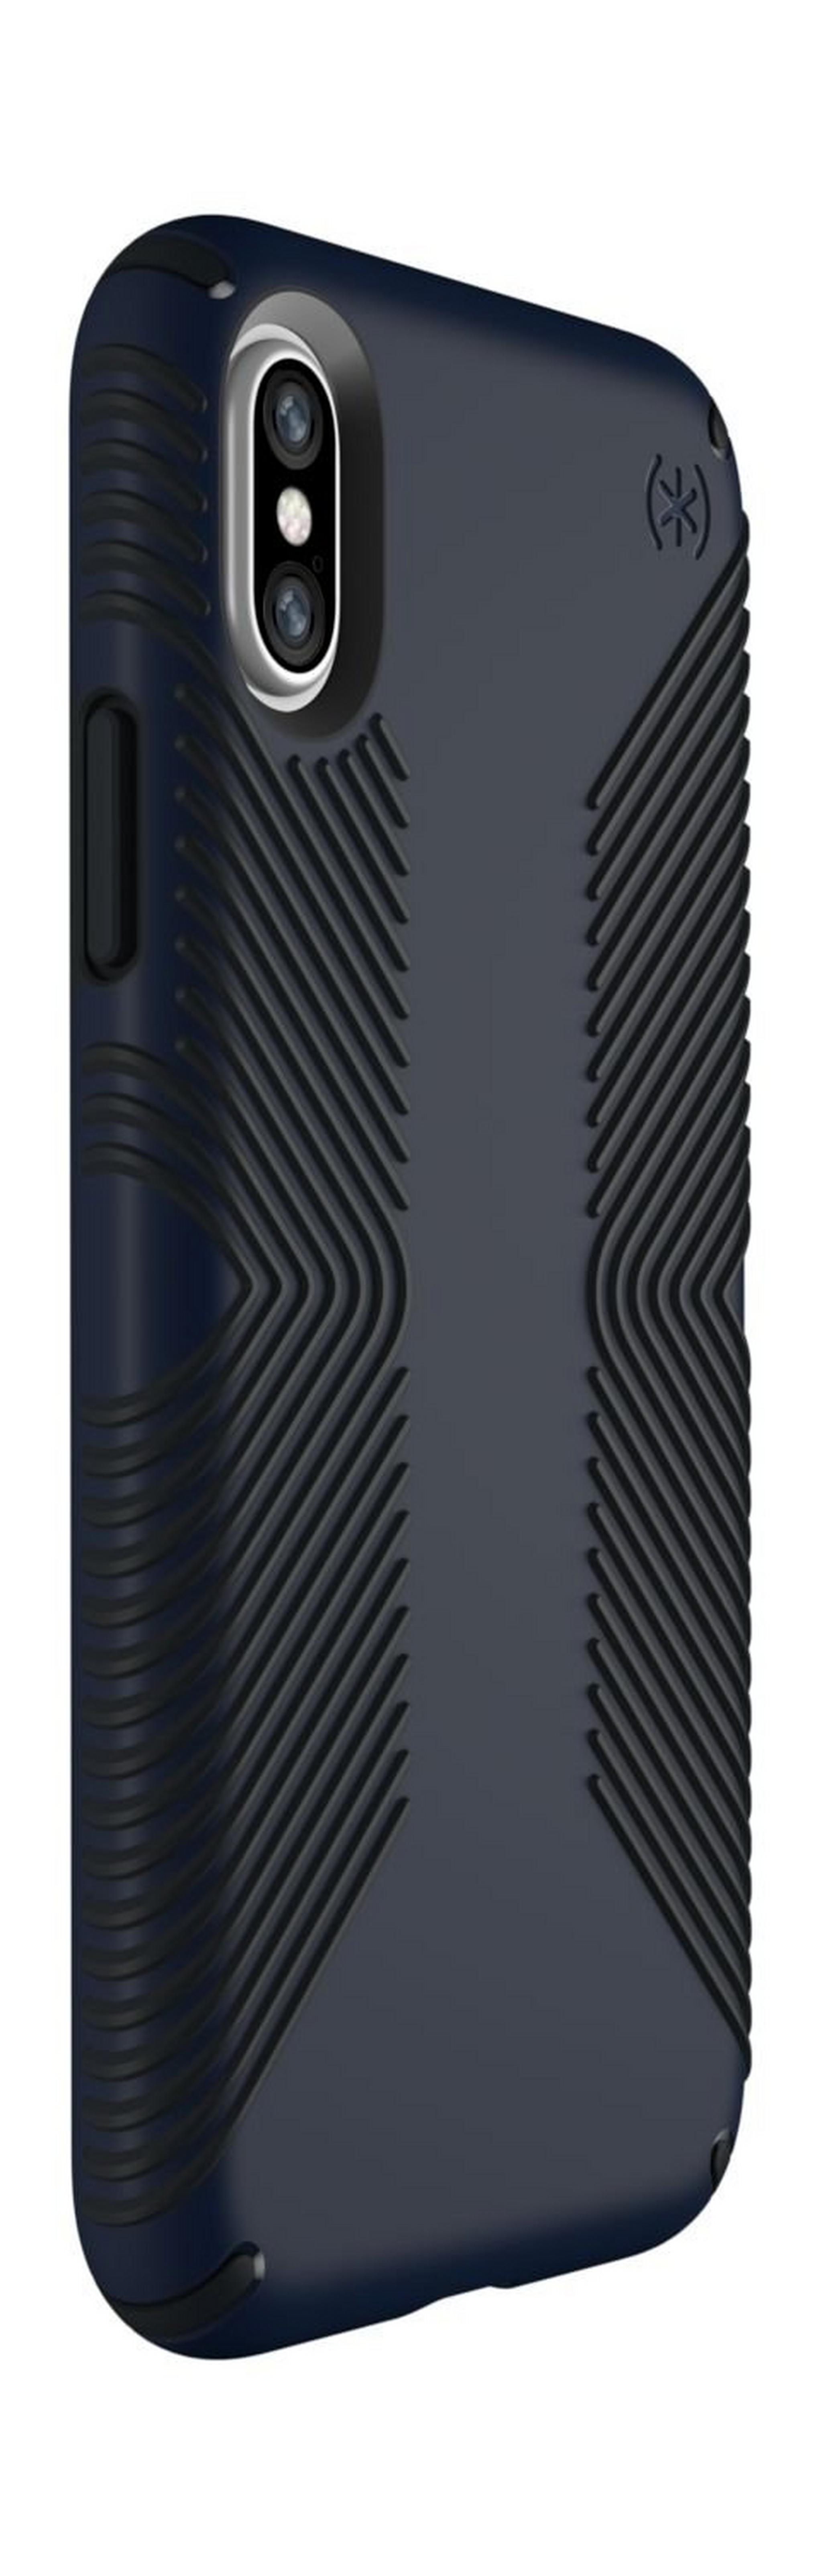 Speck Presidio Grip Case For iPhone XR - Carbon